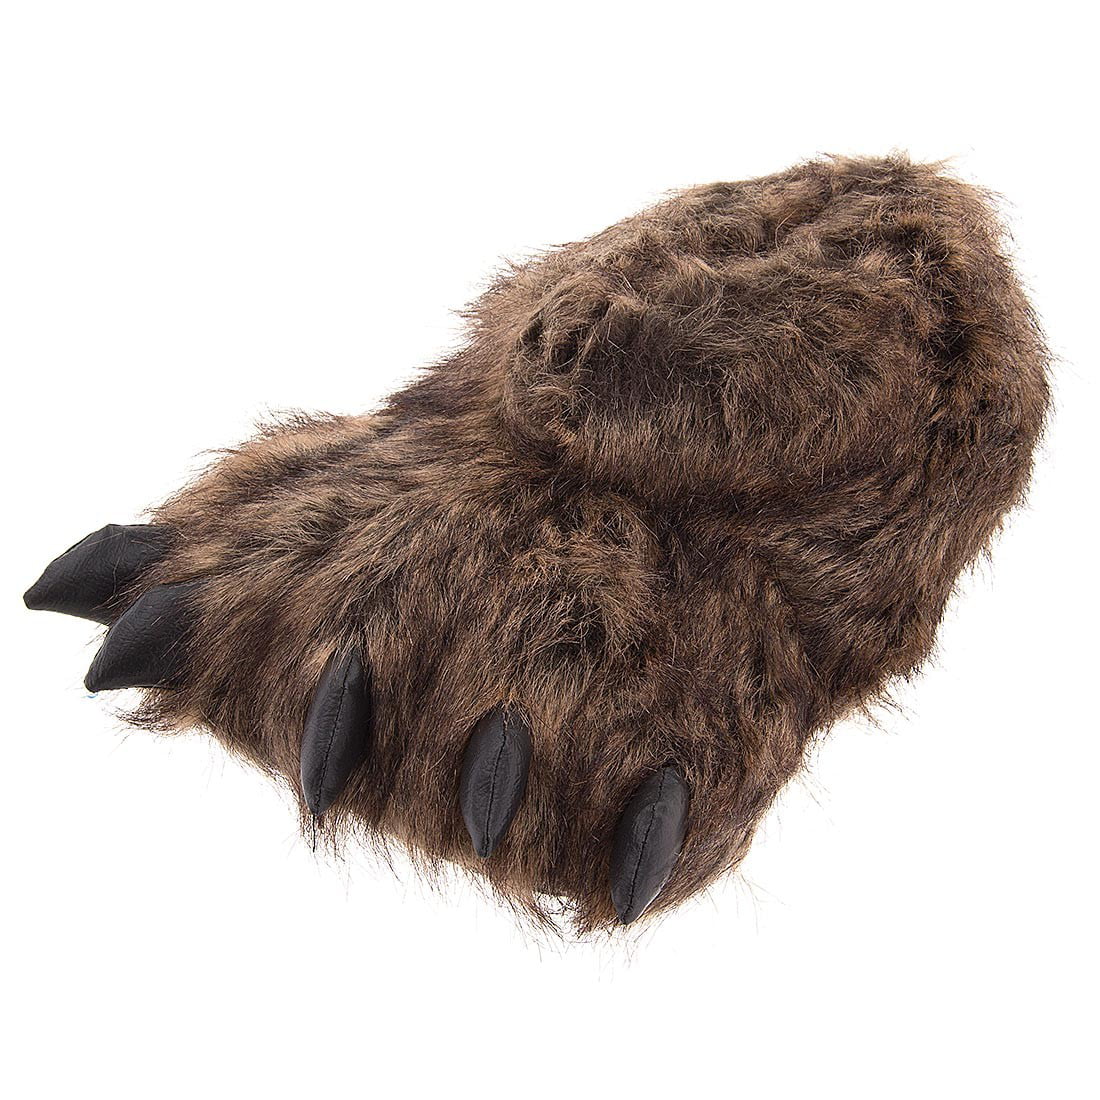 Fleksibel by Kammerat Grizzly Bear Paw Slippers for Women and Men - Walmart.com